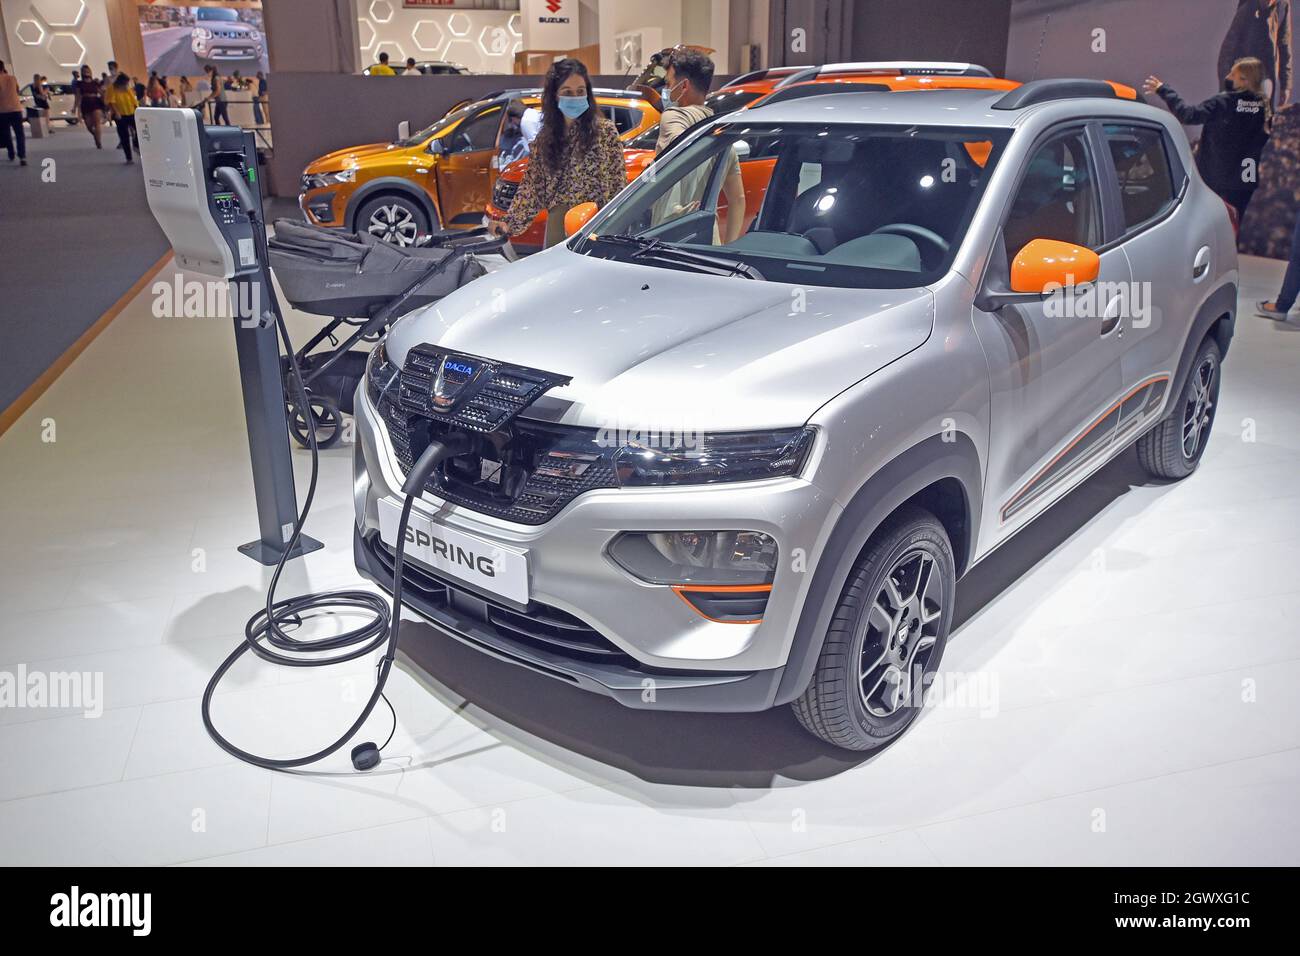 View of a Dacia Spring electric car charging its batteries at the